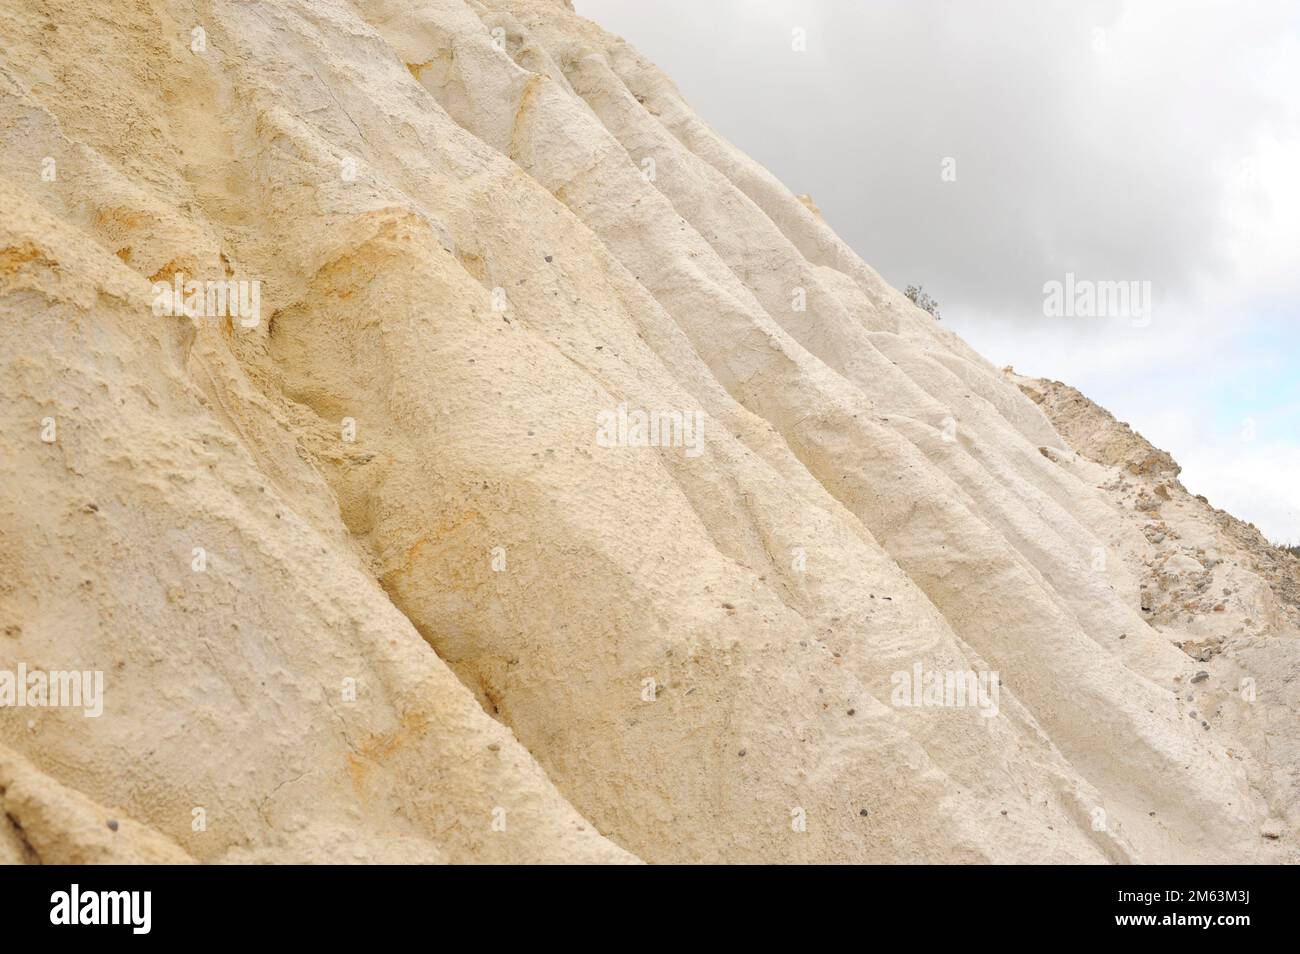 Kaolin or China clay is a sedimentary rock rich on kaolinite a phyllosilicate mineral. It is used in ceramics (porcelain), paper industrie, medicine Stock Photo